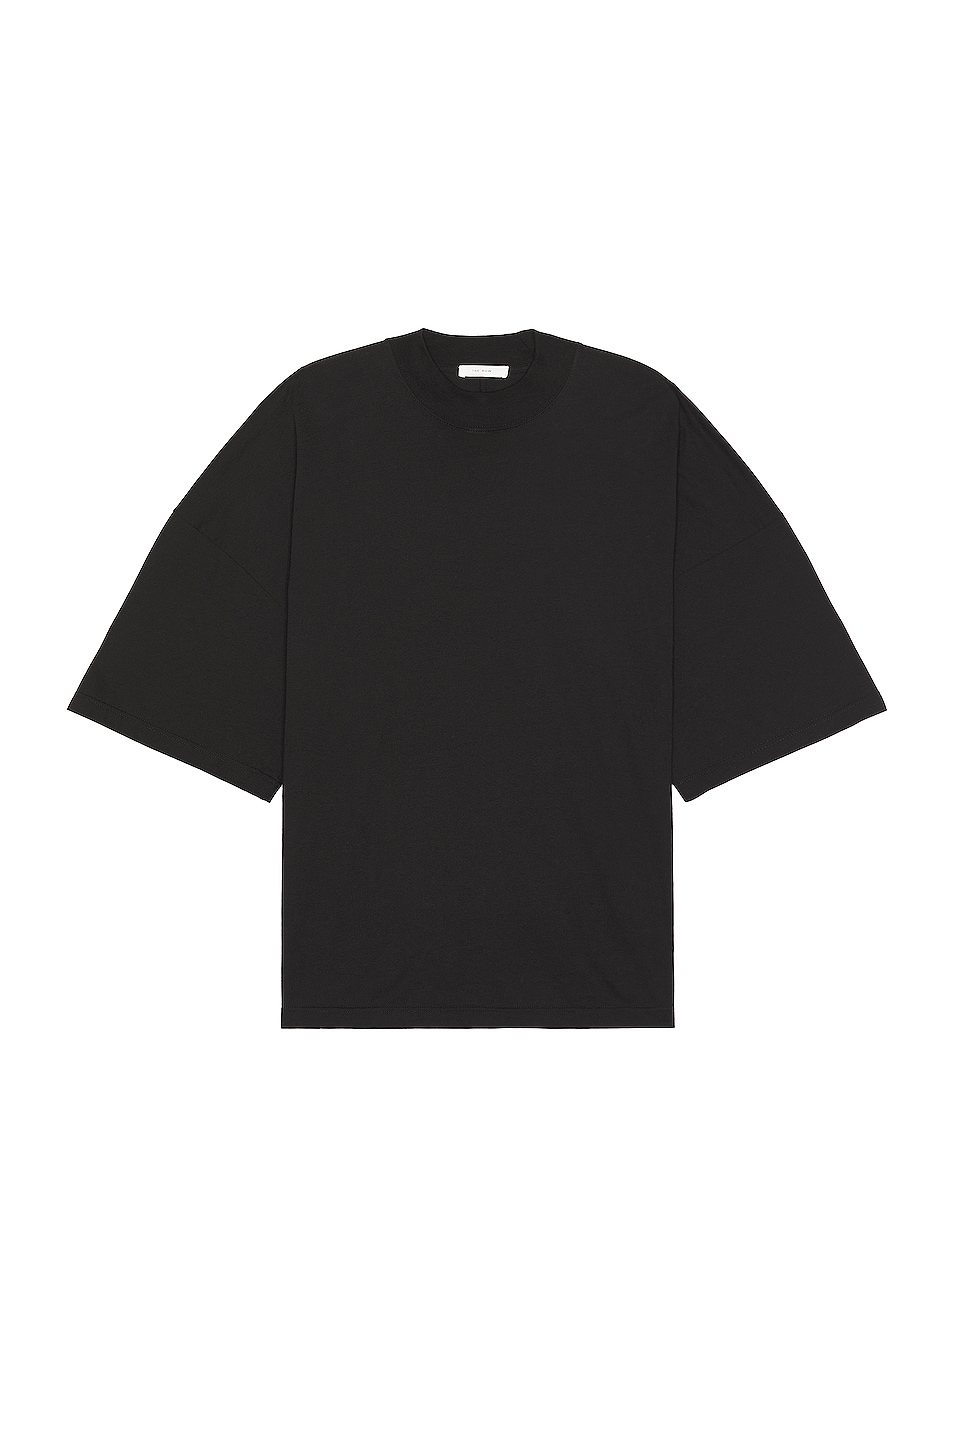 Image 1 of The Row Dustin Top in Black